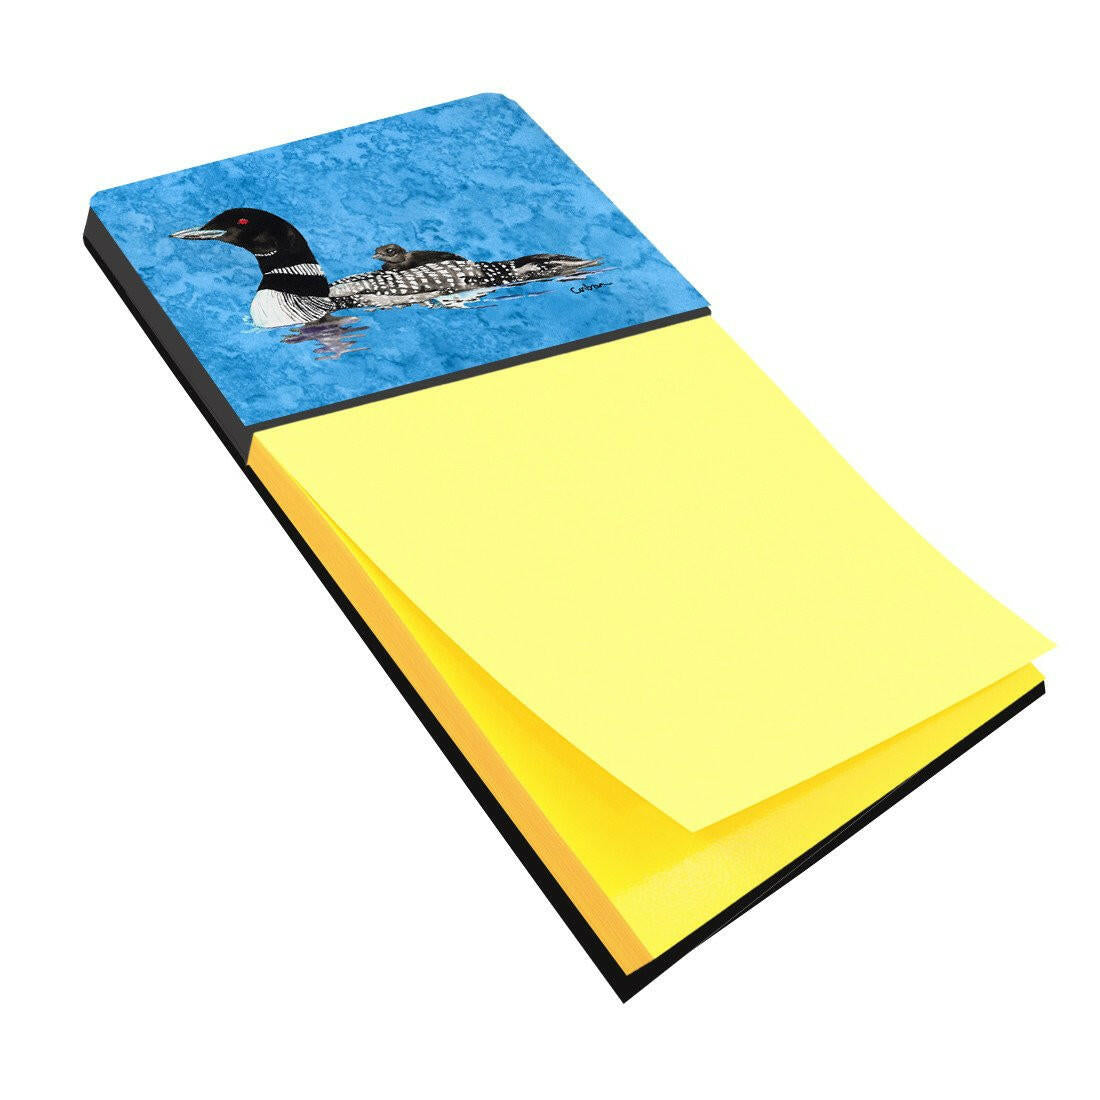 Momma and Baby Loon Refiillable Sticky Note Holder or Postit Note Dispenser 8718SN by Caroline's Treasures